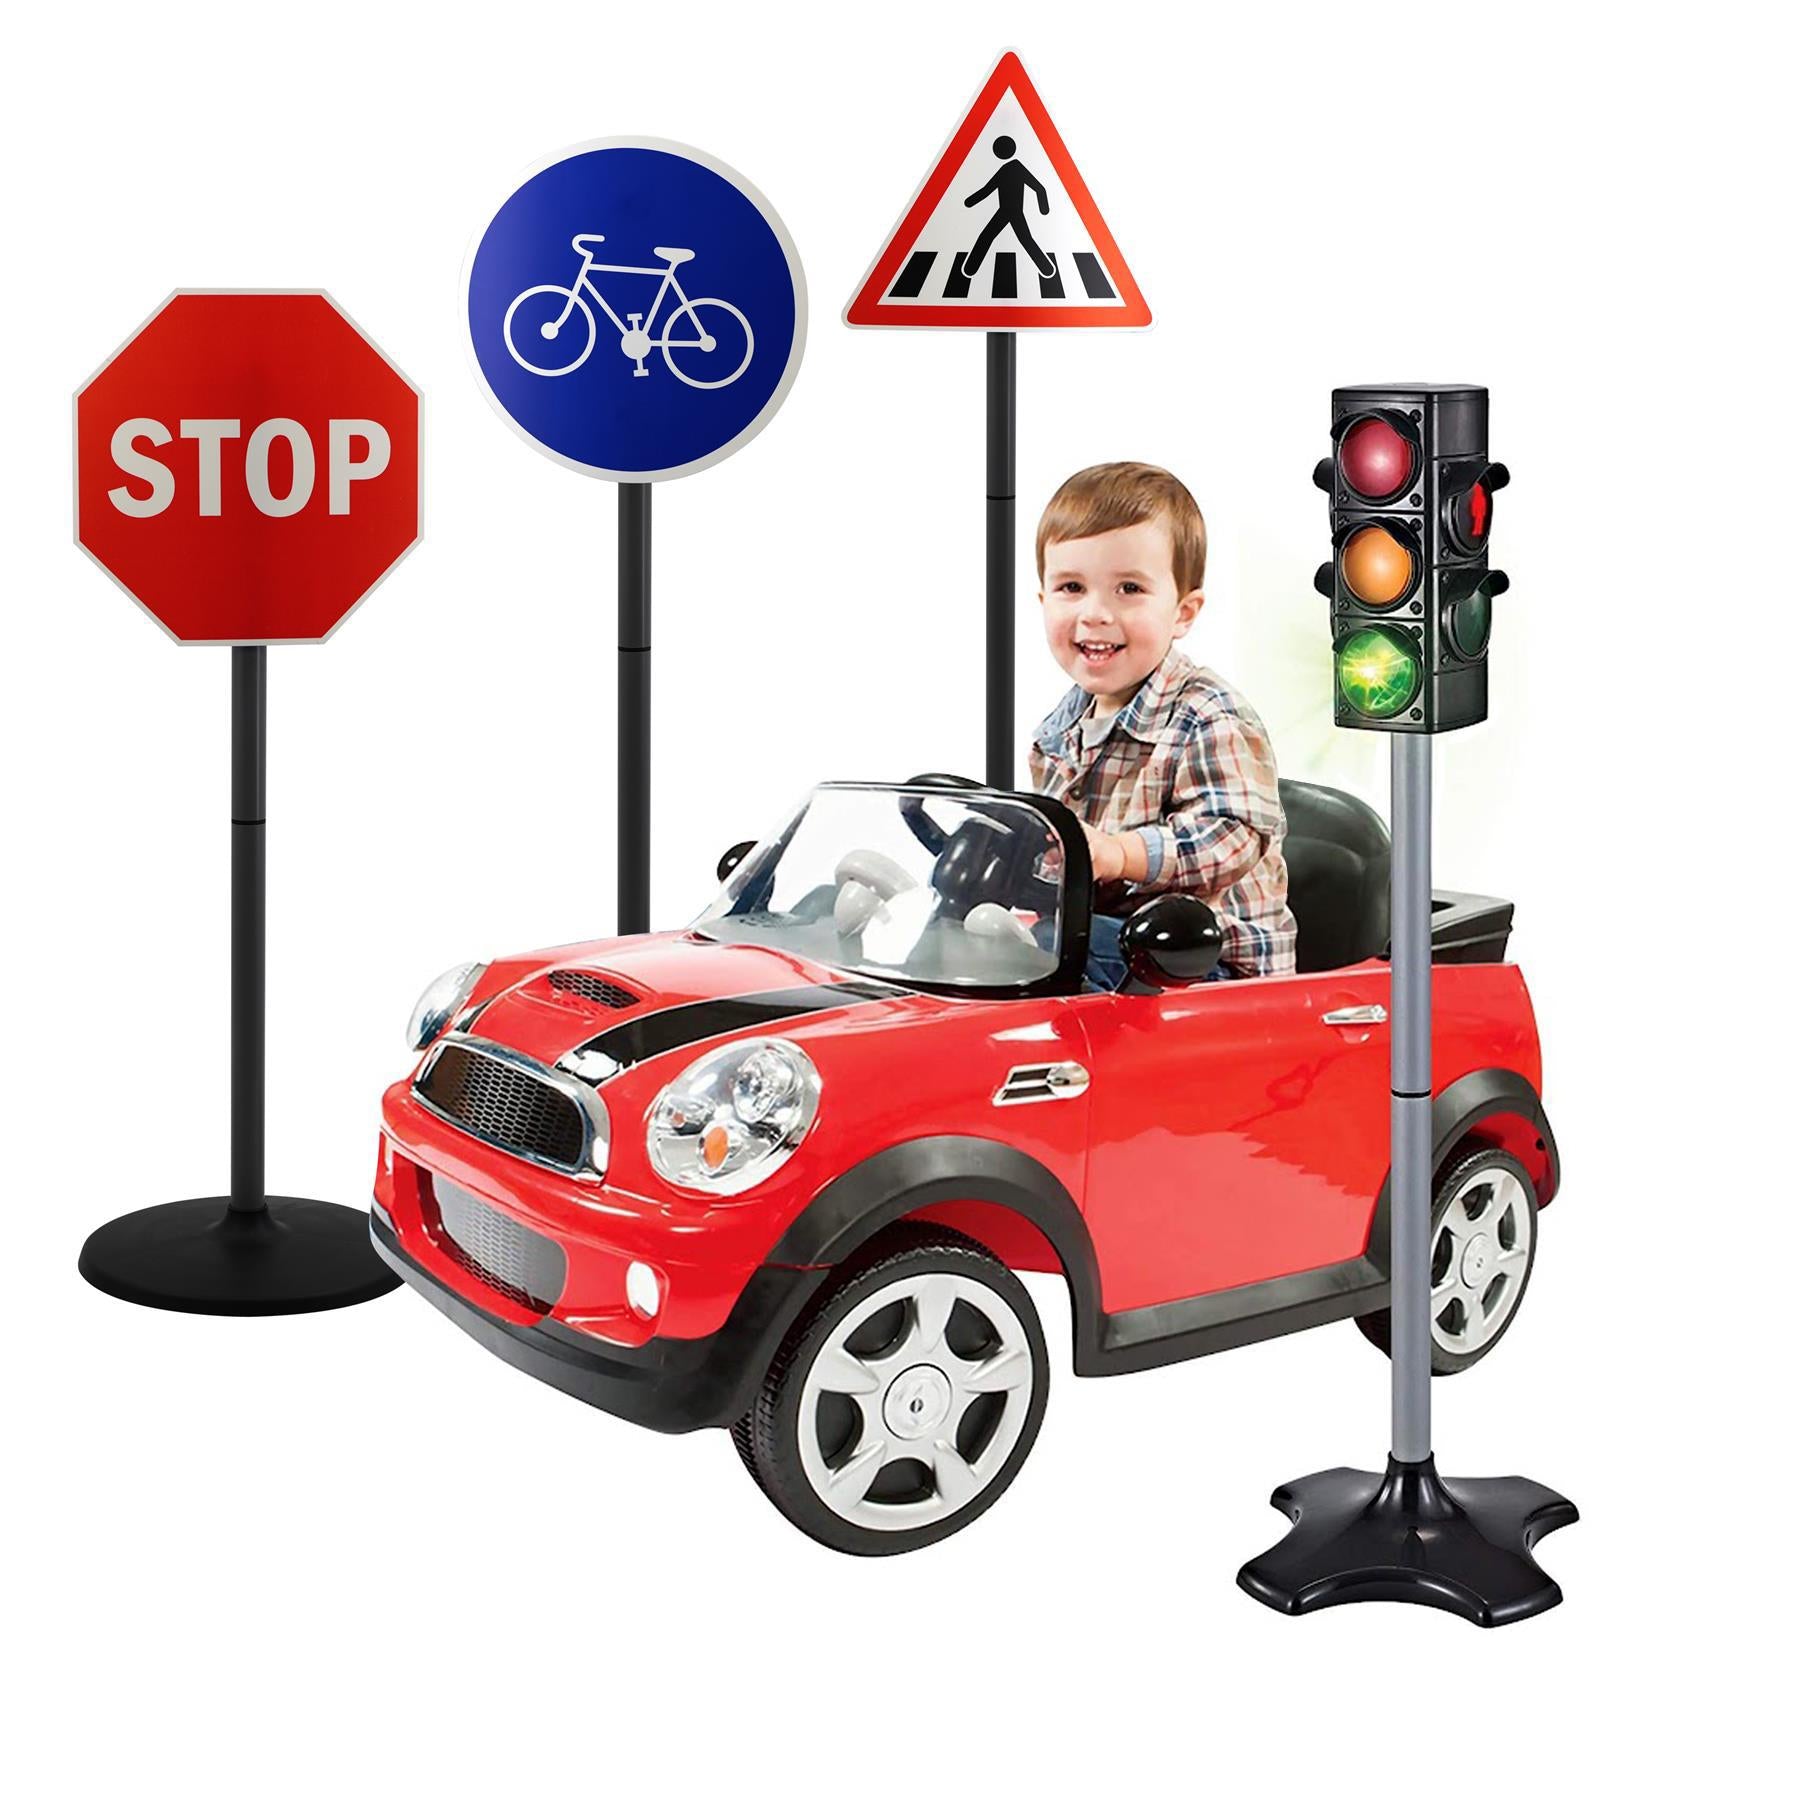 Set of Road Signs and Traffic Lights by The Magic Toy Shop - The Magic Toy Shop